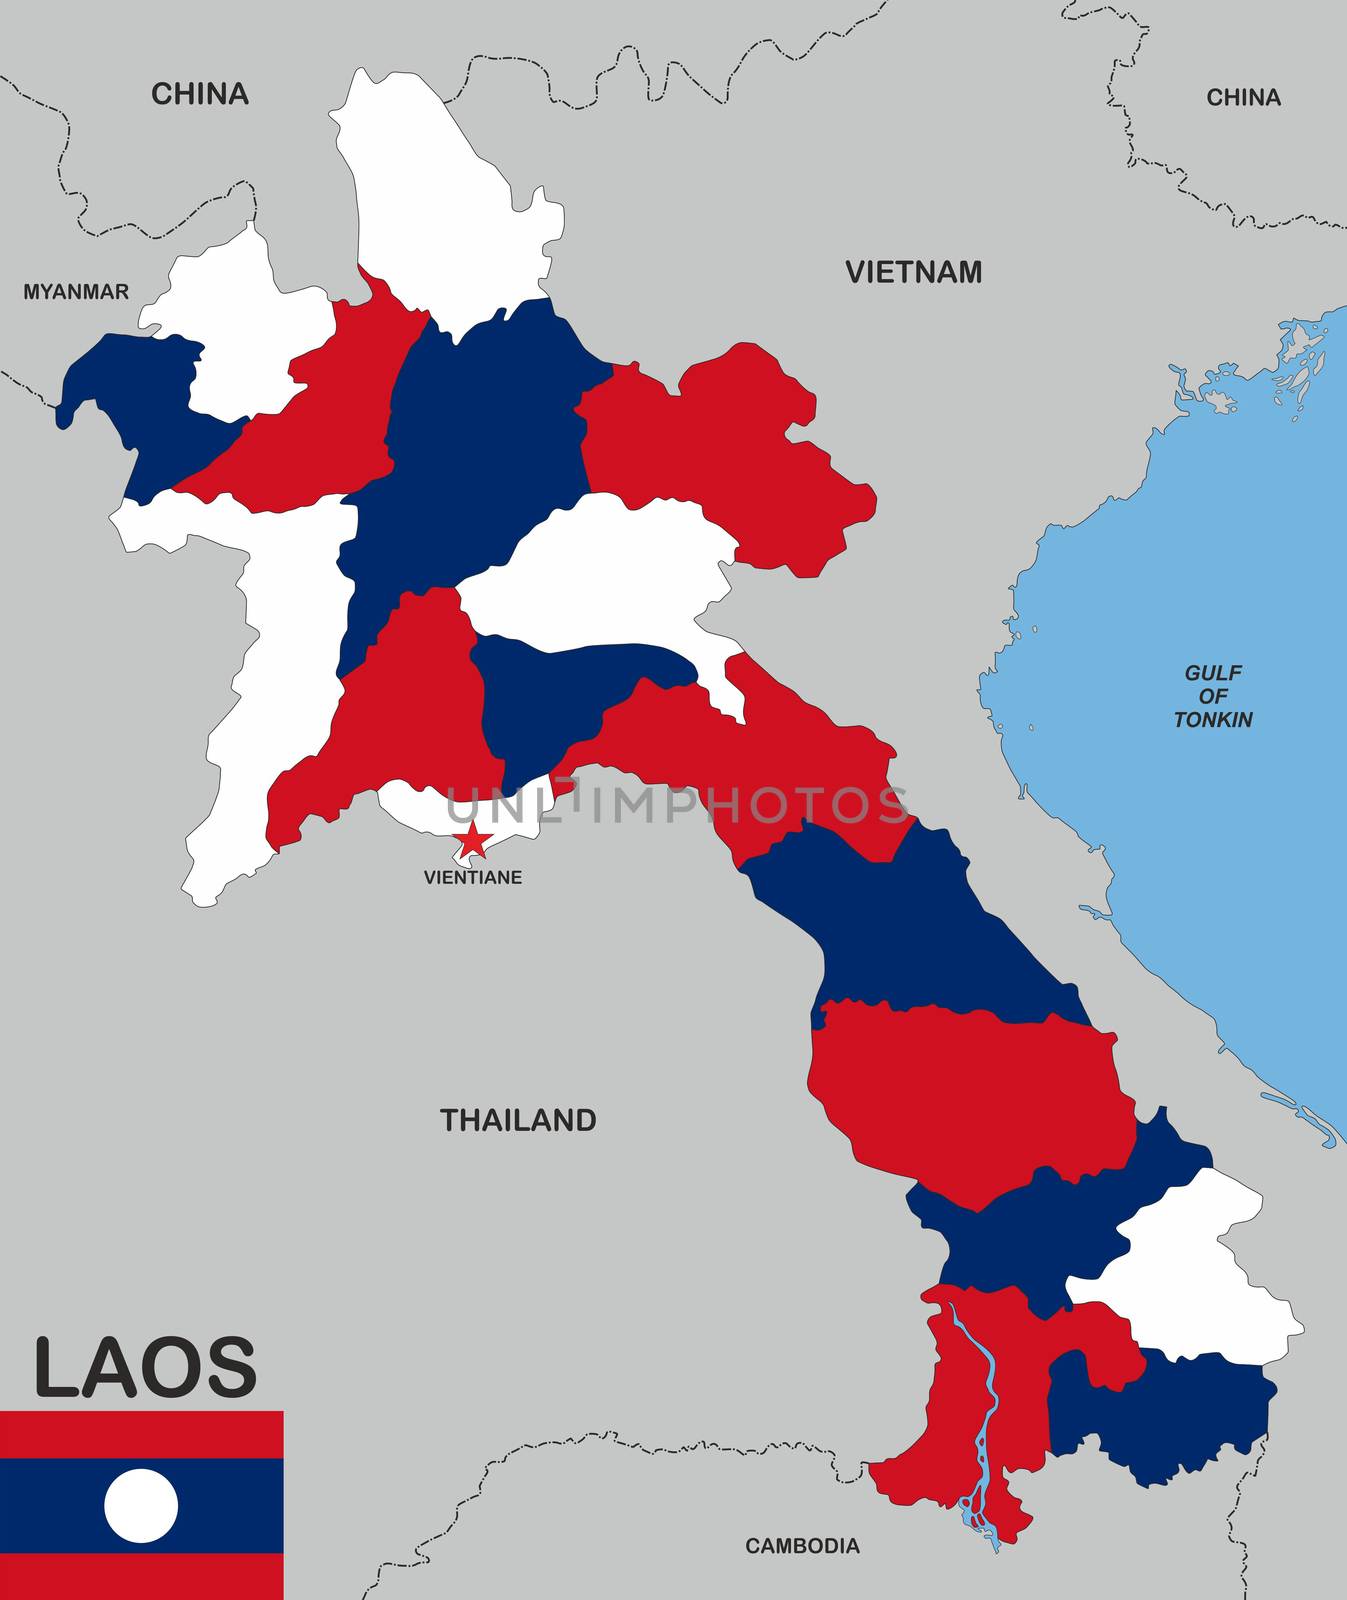 very big size laos political map with flag